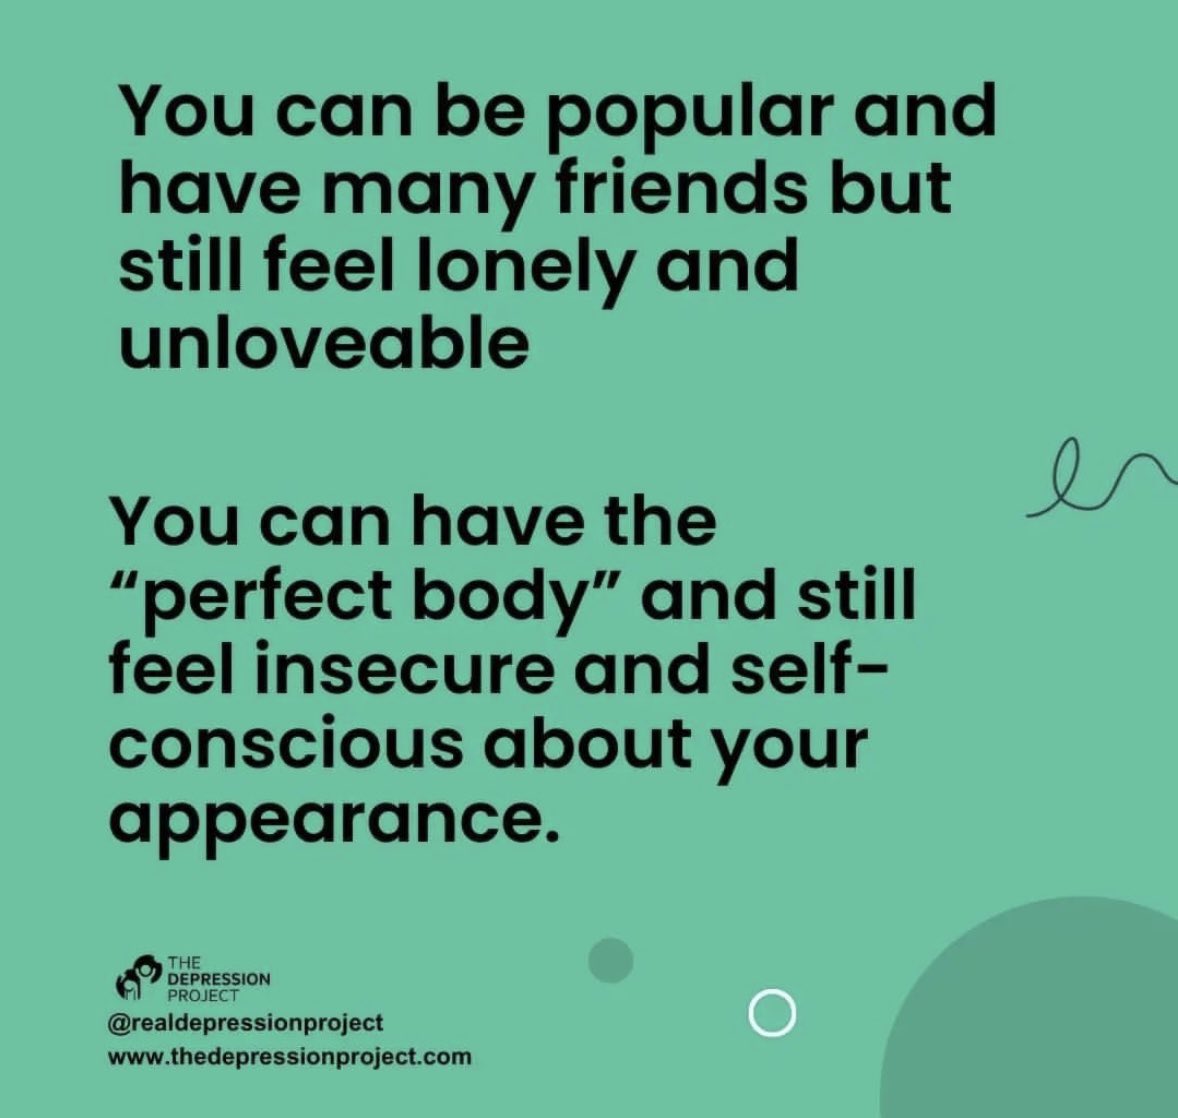 No one is immune, but help is available for all of us. You don't have to suffer in silence. Call, chat, or text #988. #MentalHealthAwarenessMonth